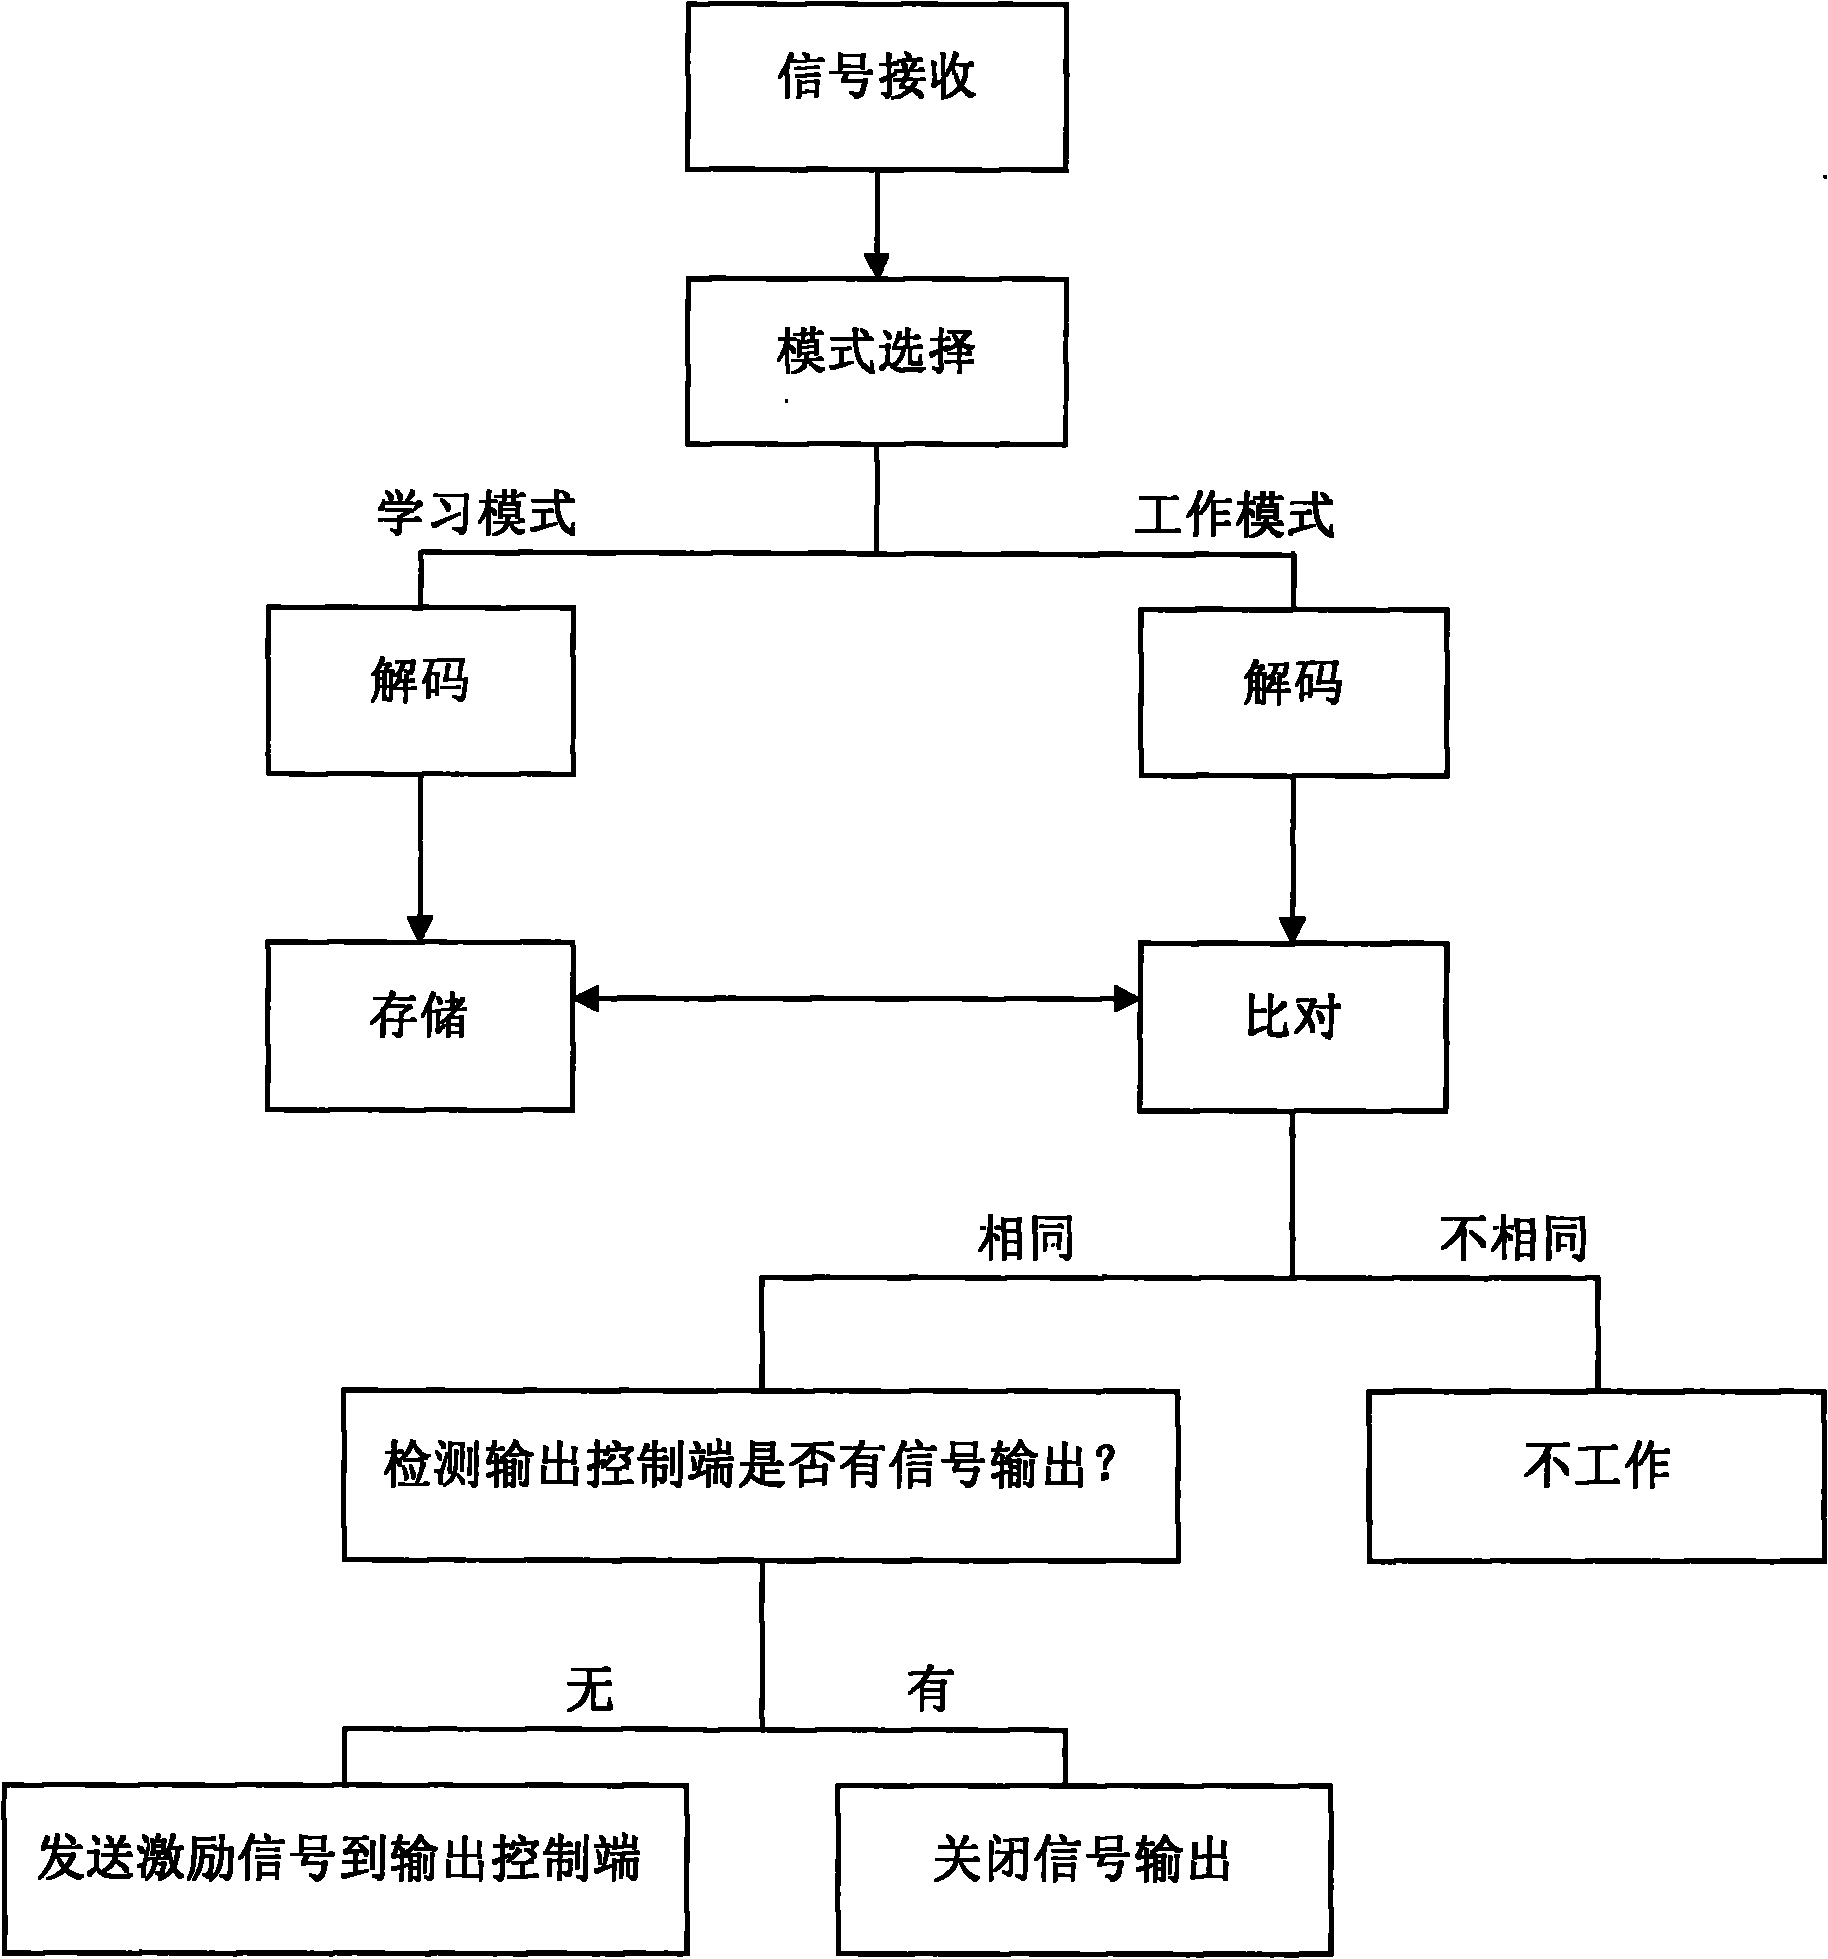 Remote control system, control method thereof and remote control lamp using system